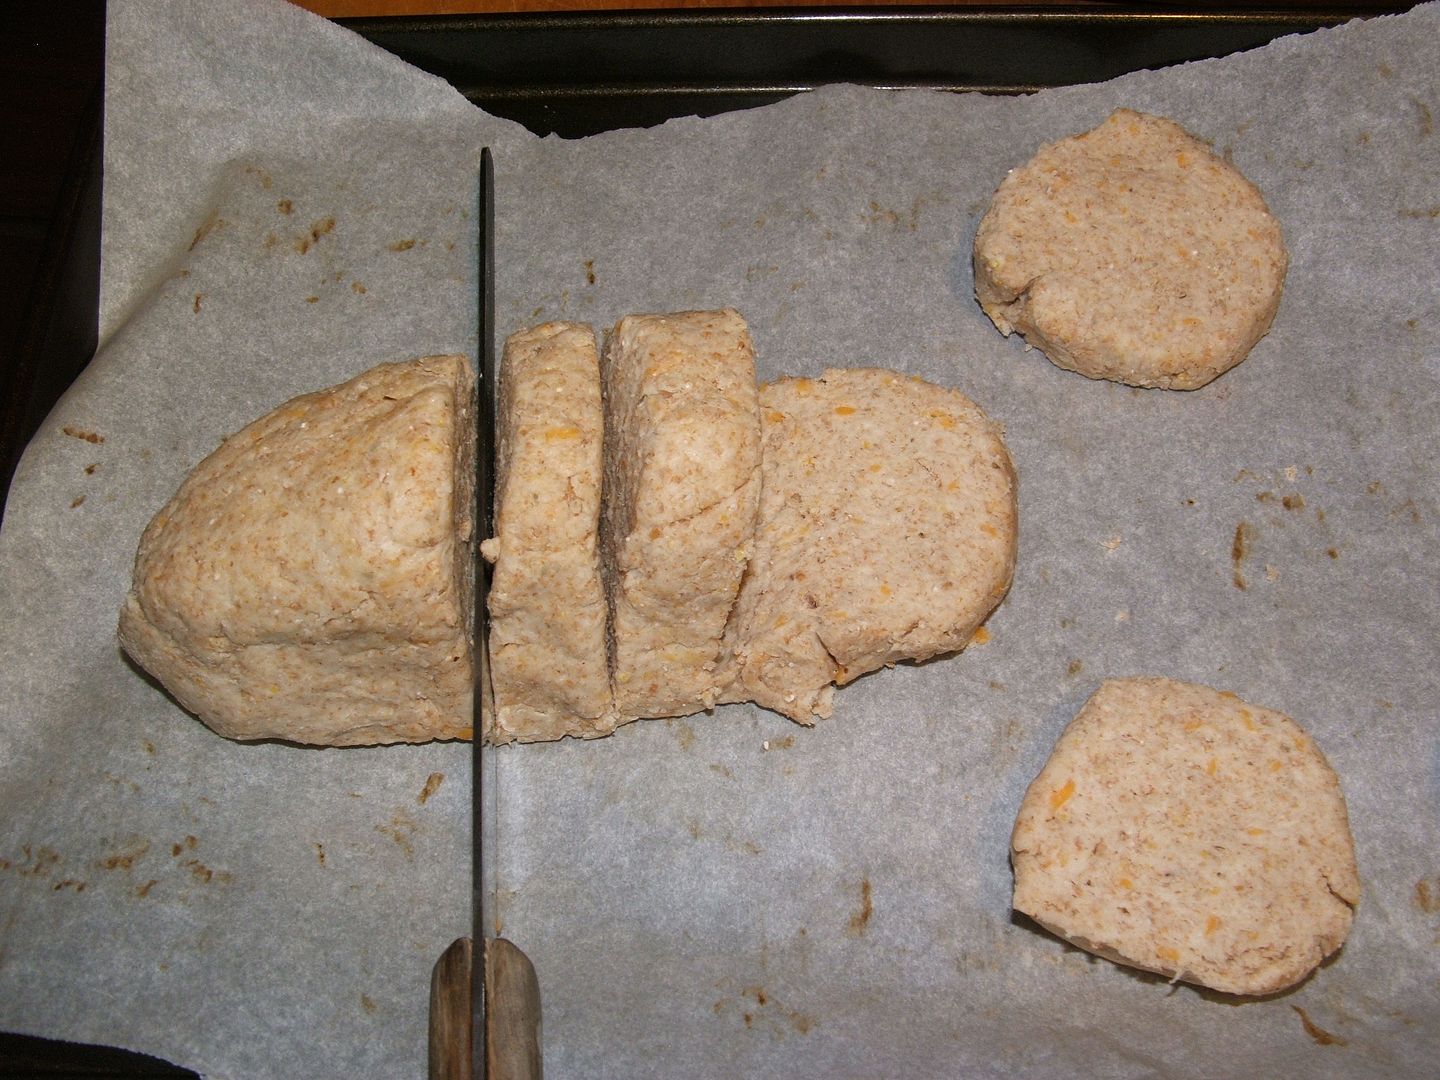 Whole Grain Cheese Biscuits by Angie Ouellette-Tower for godsgrowinggarden.com photo 004_zps80f7f6e1.jpg